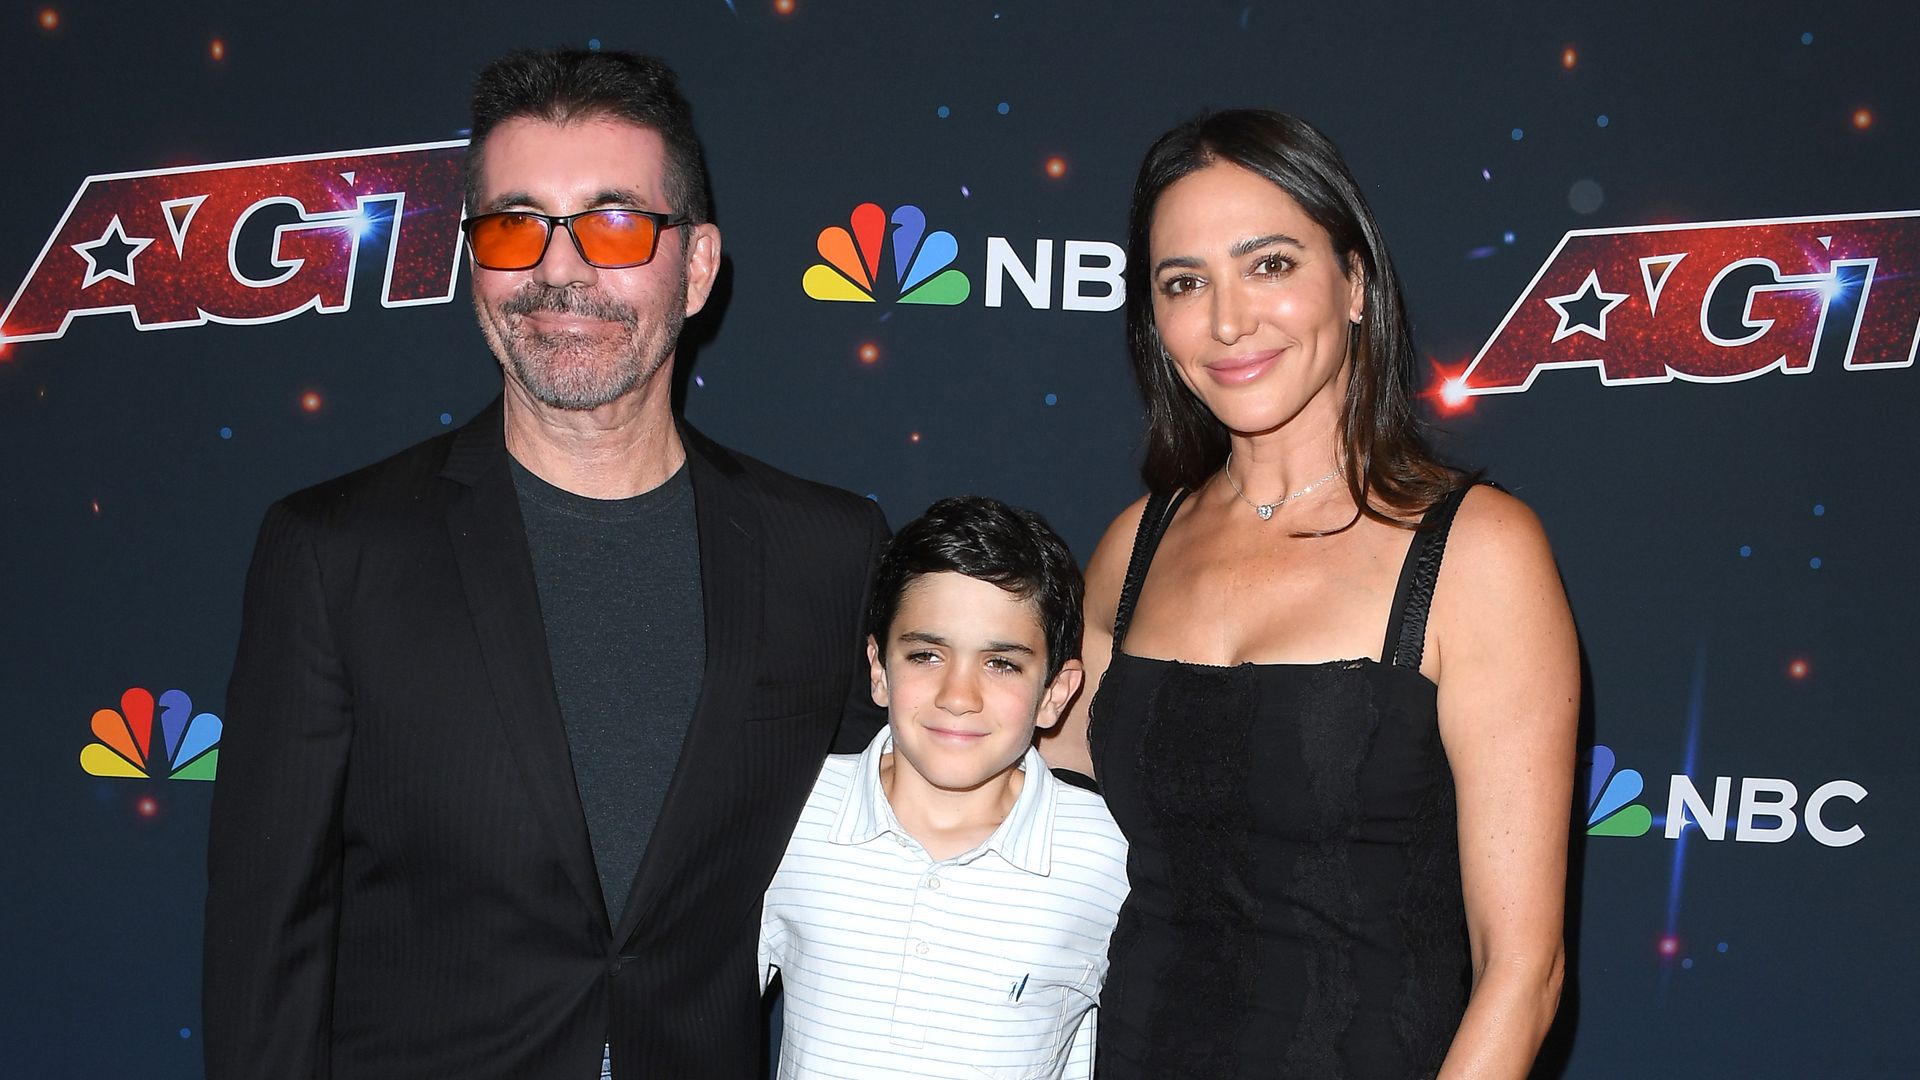 Simon Cowell, Eric Philip Cowell, and Lauren Silverman arrive at the Red Carpet For "America's Got Talent" Season 18 Finale in 2023